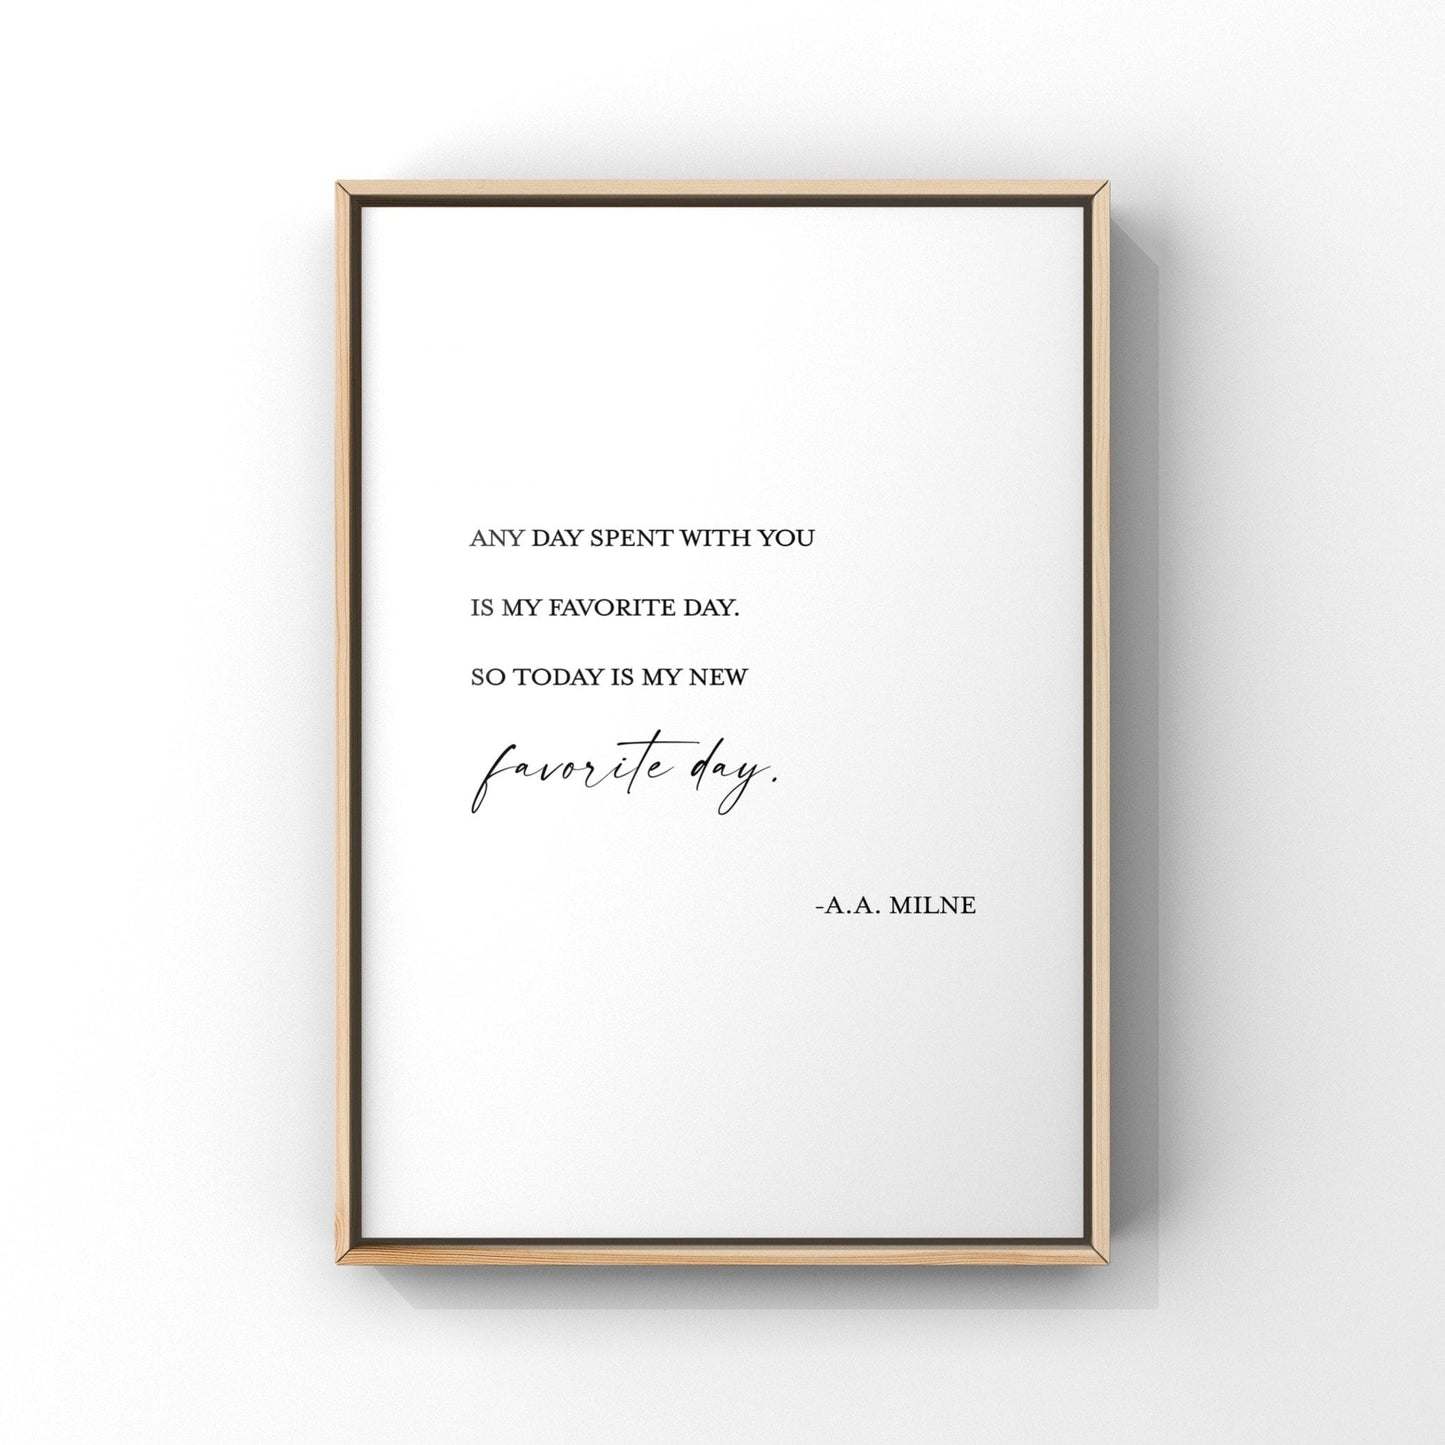 Any day spent with you is my favorite day,AA Milne print,Anniversary gift,Gift for friend,Friendship quote,Nursery print,Winnie the Pooh